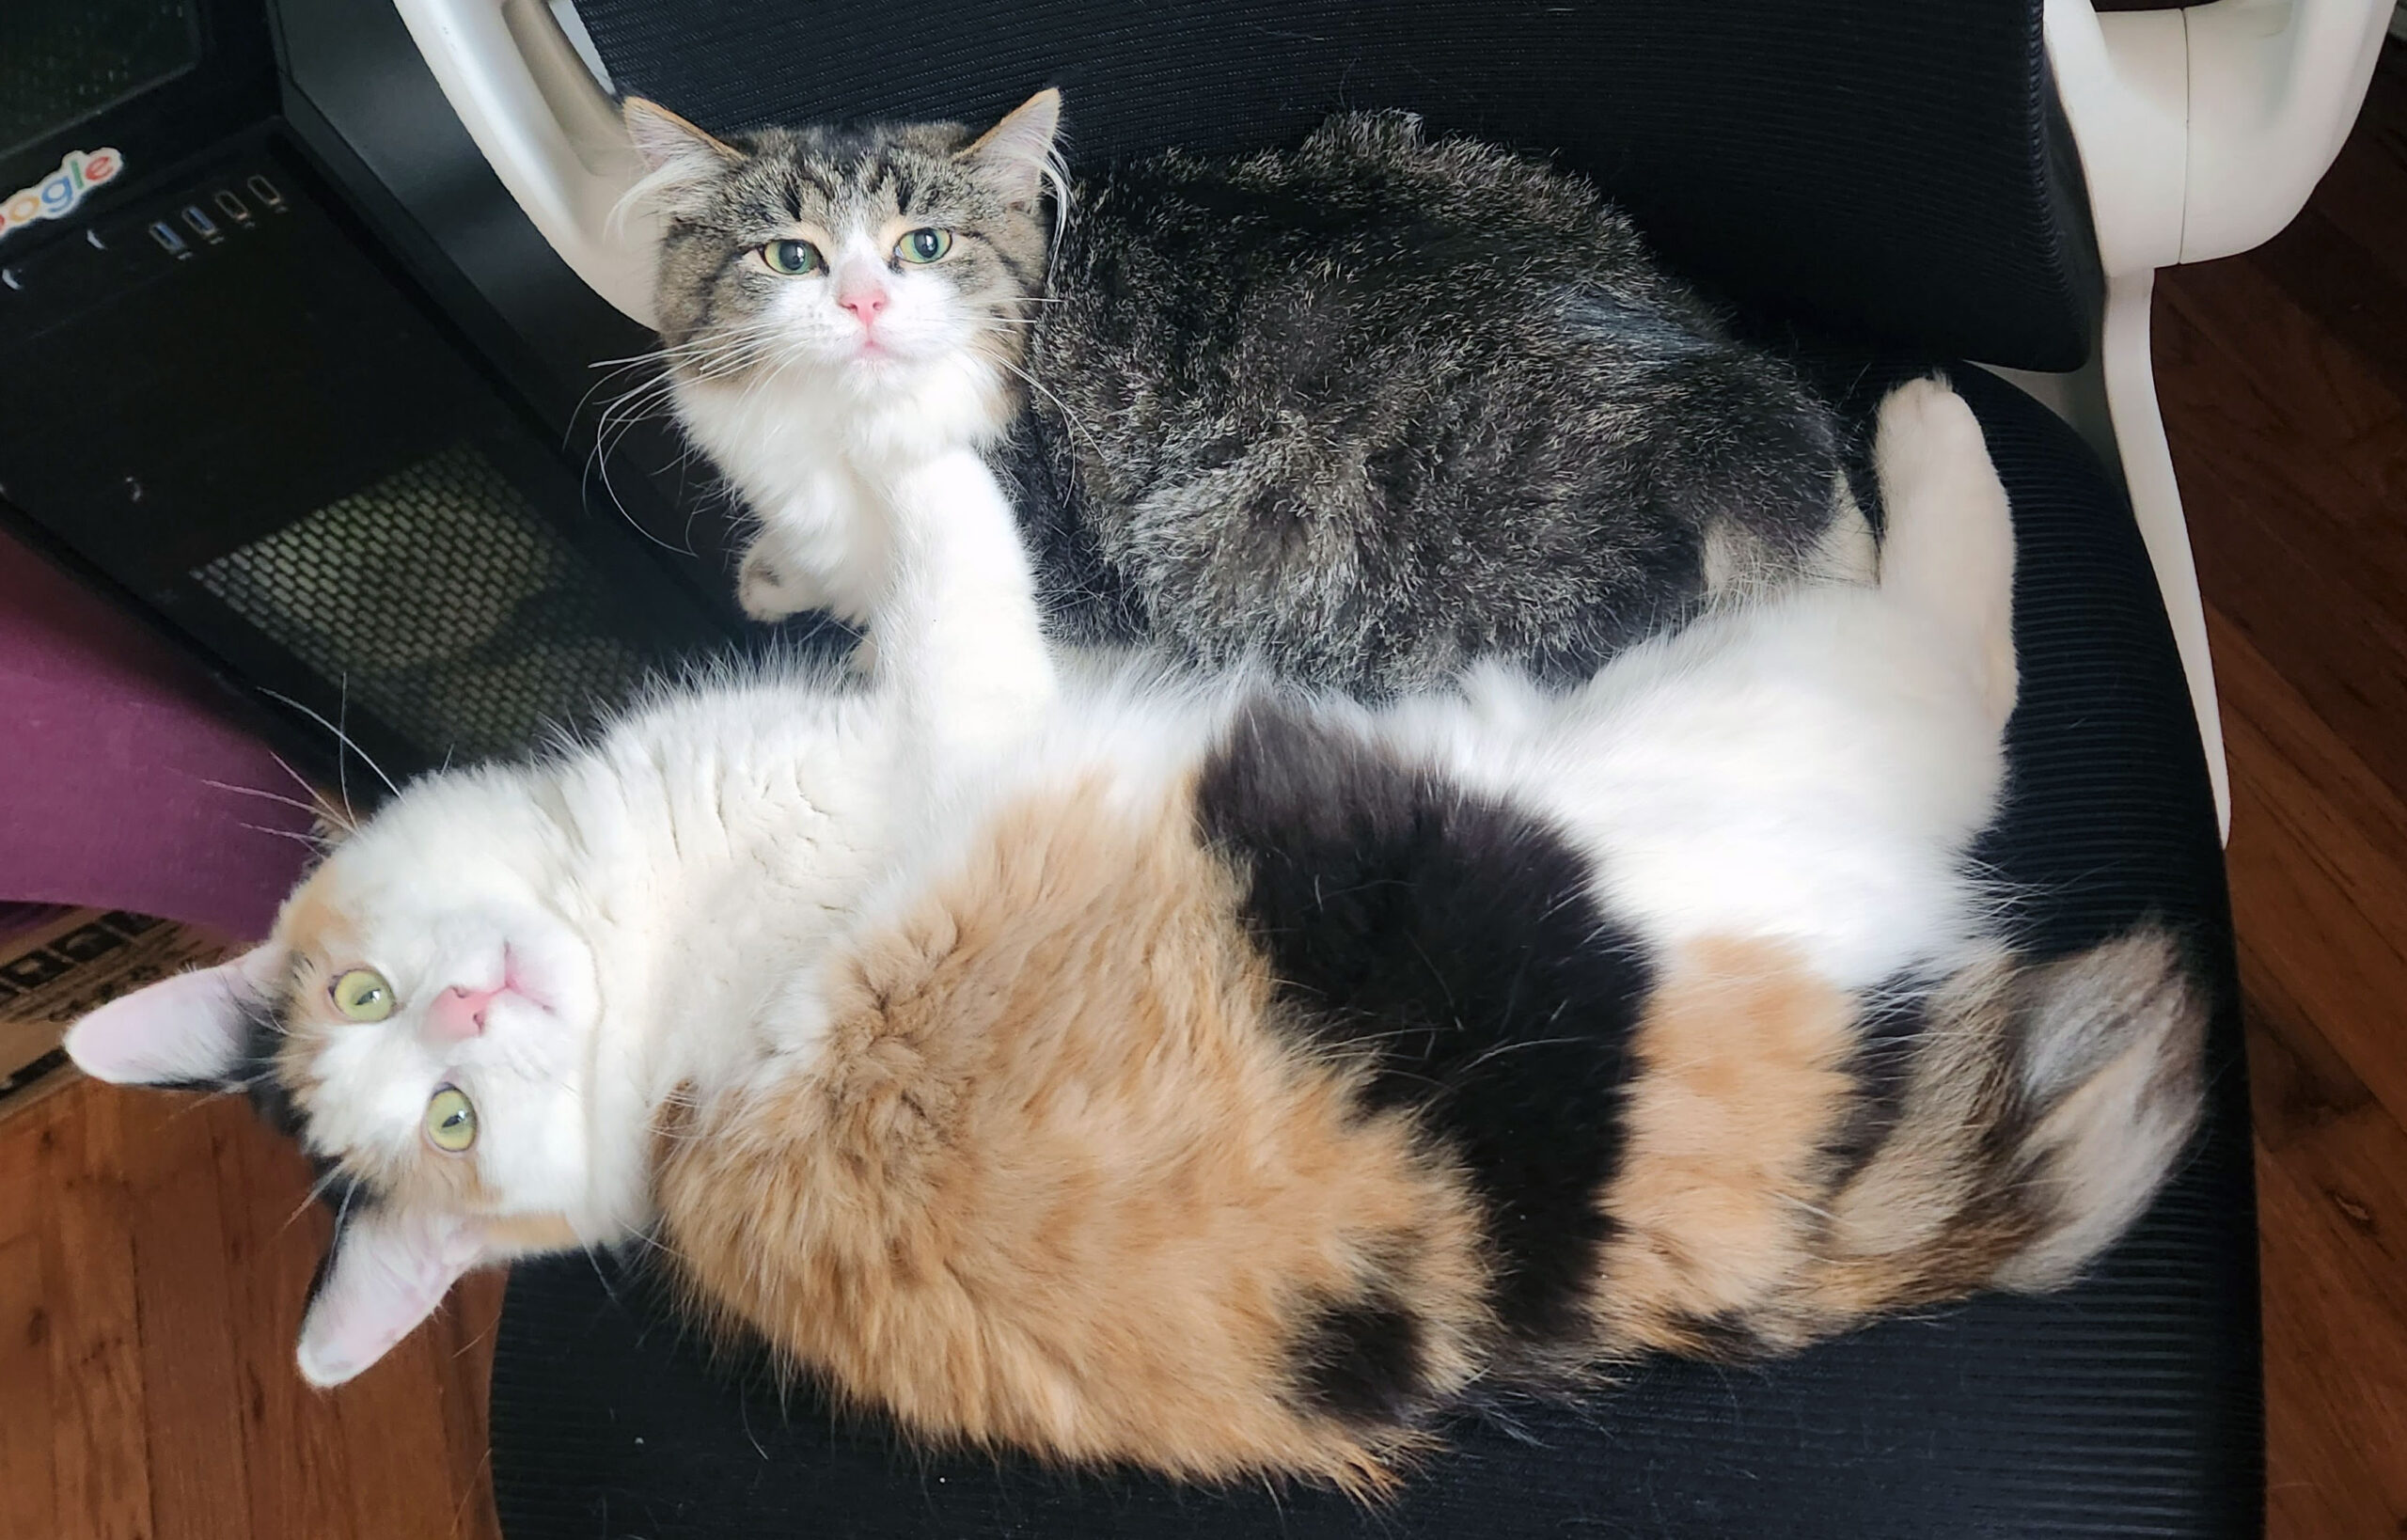 Furry Friends Fur-Ever Tail: Mr. Floofmeister and Laura Pelayo